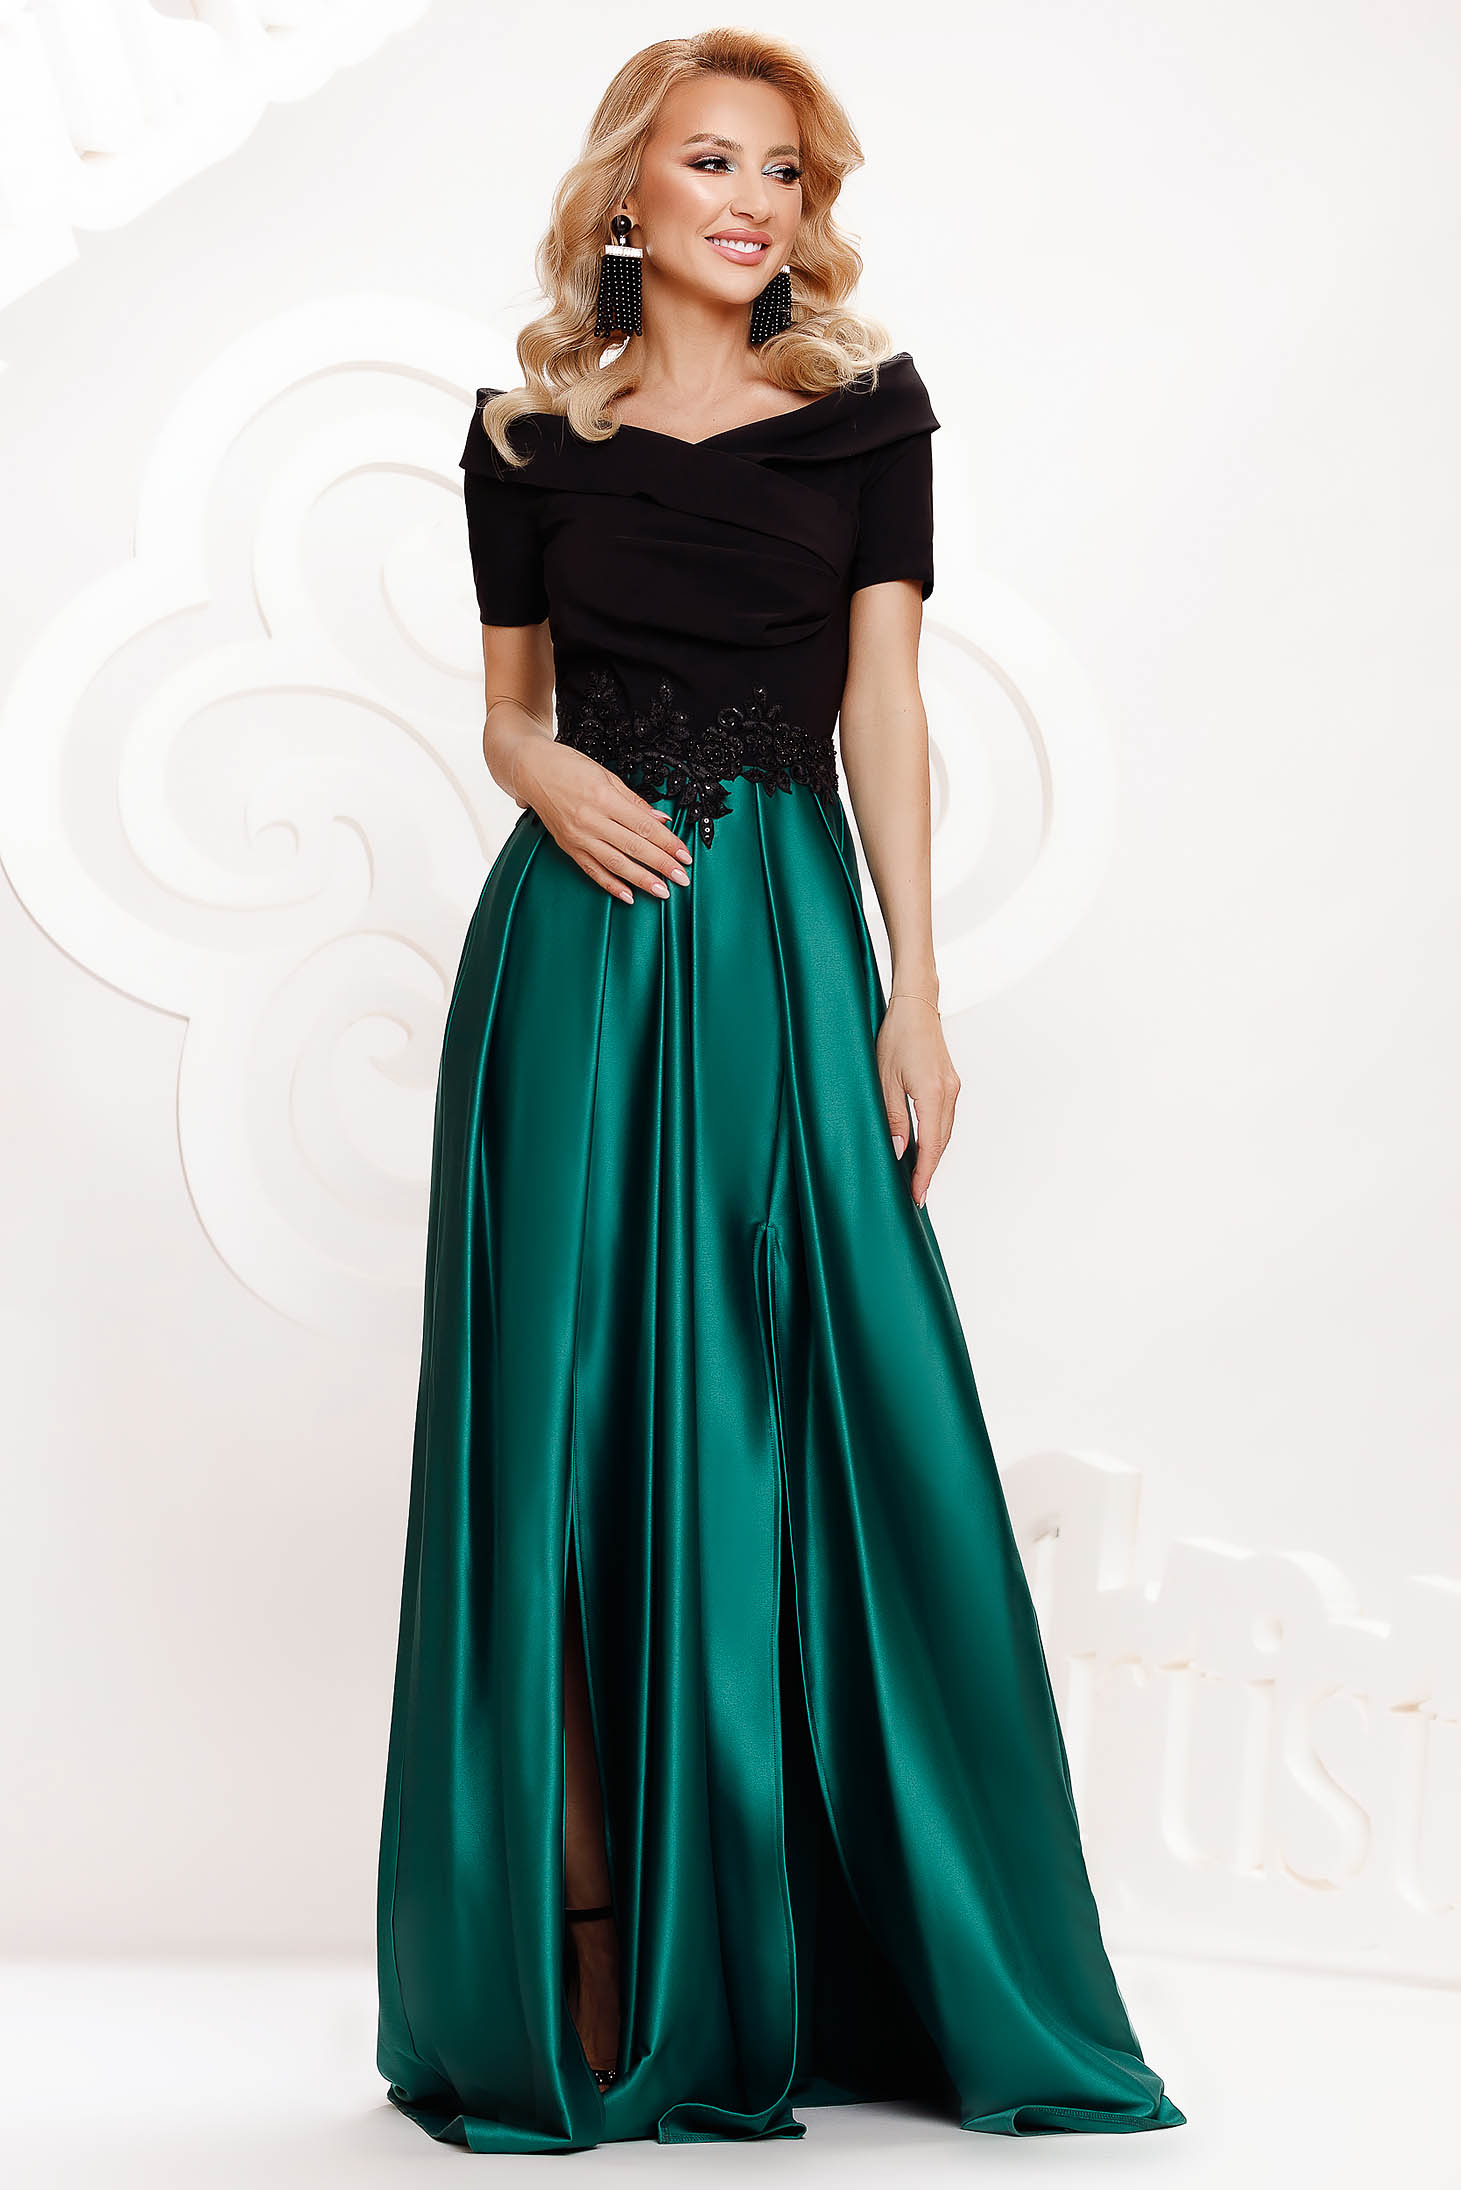 Green dress from satin cloche occasional slit on the shoulders with embellished accessories 1 - StarShinerS.com